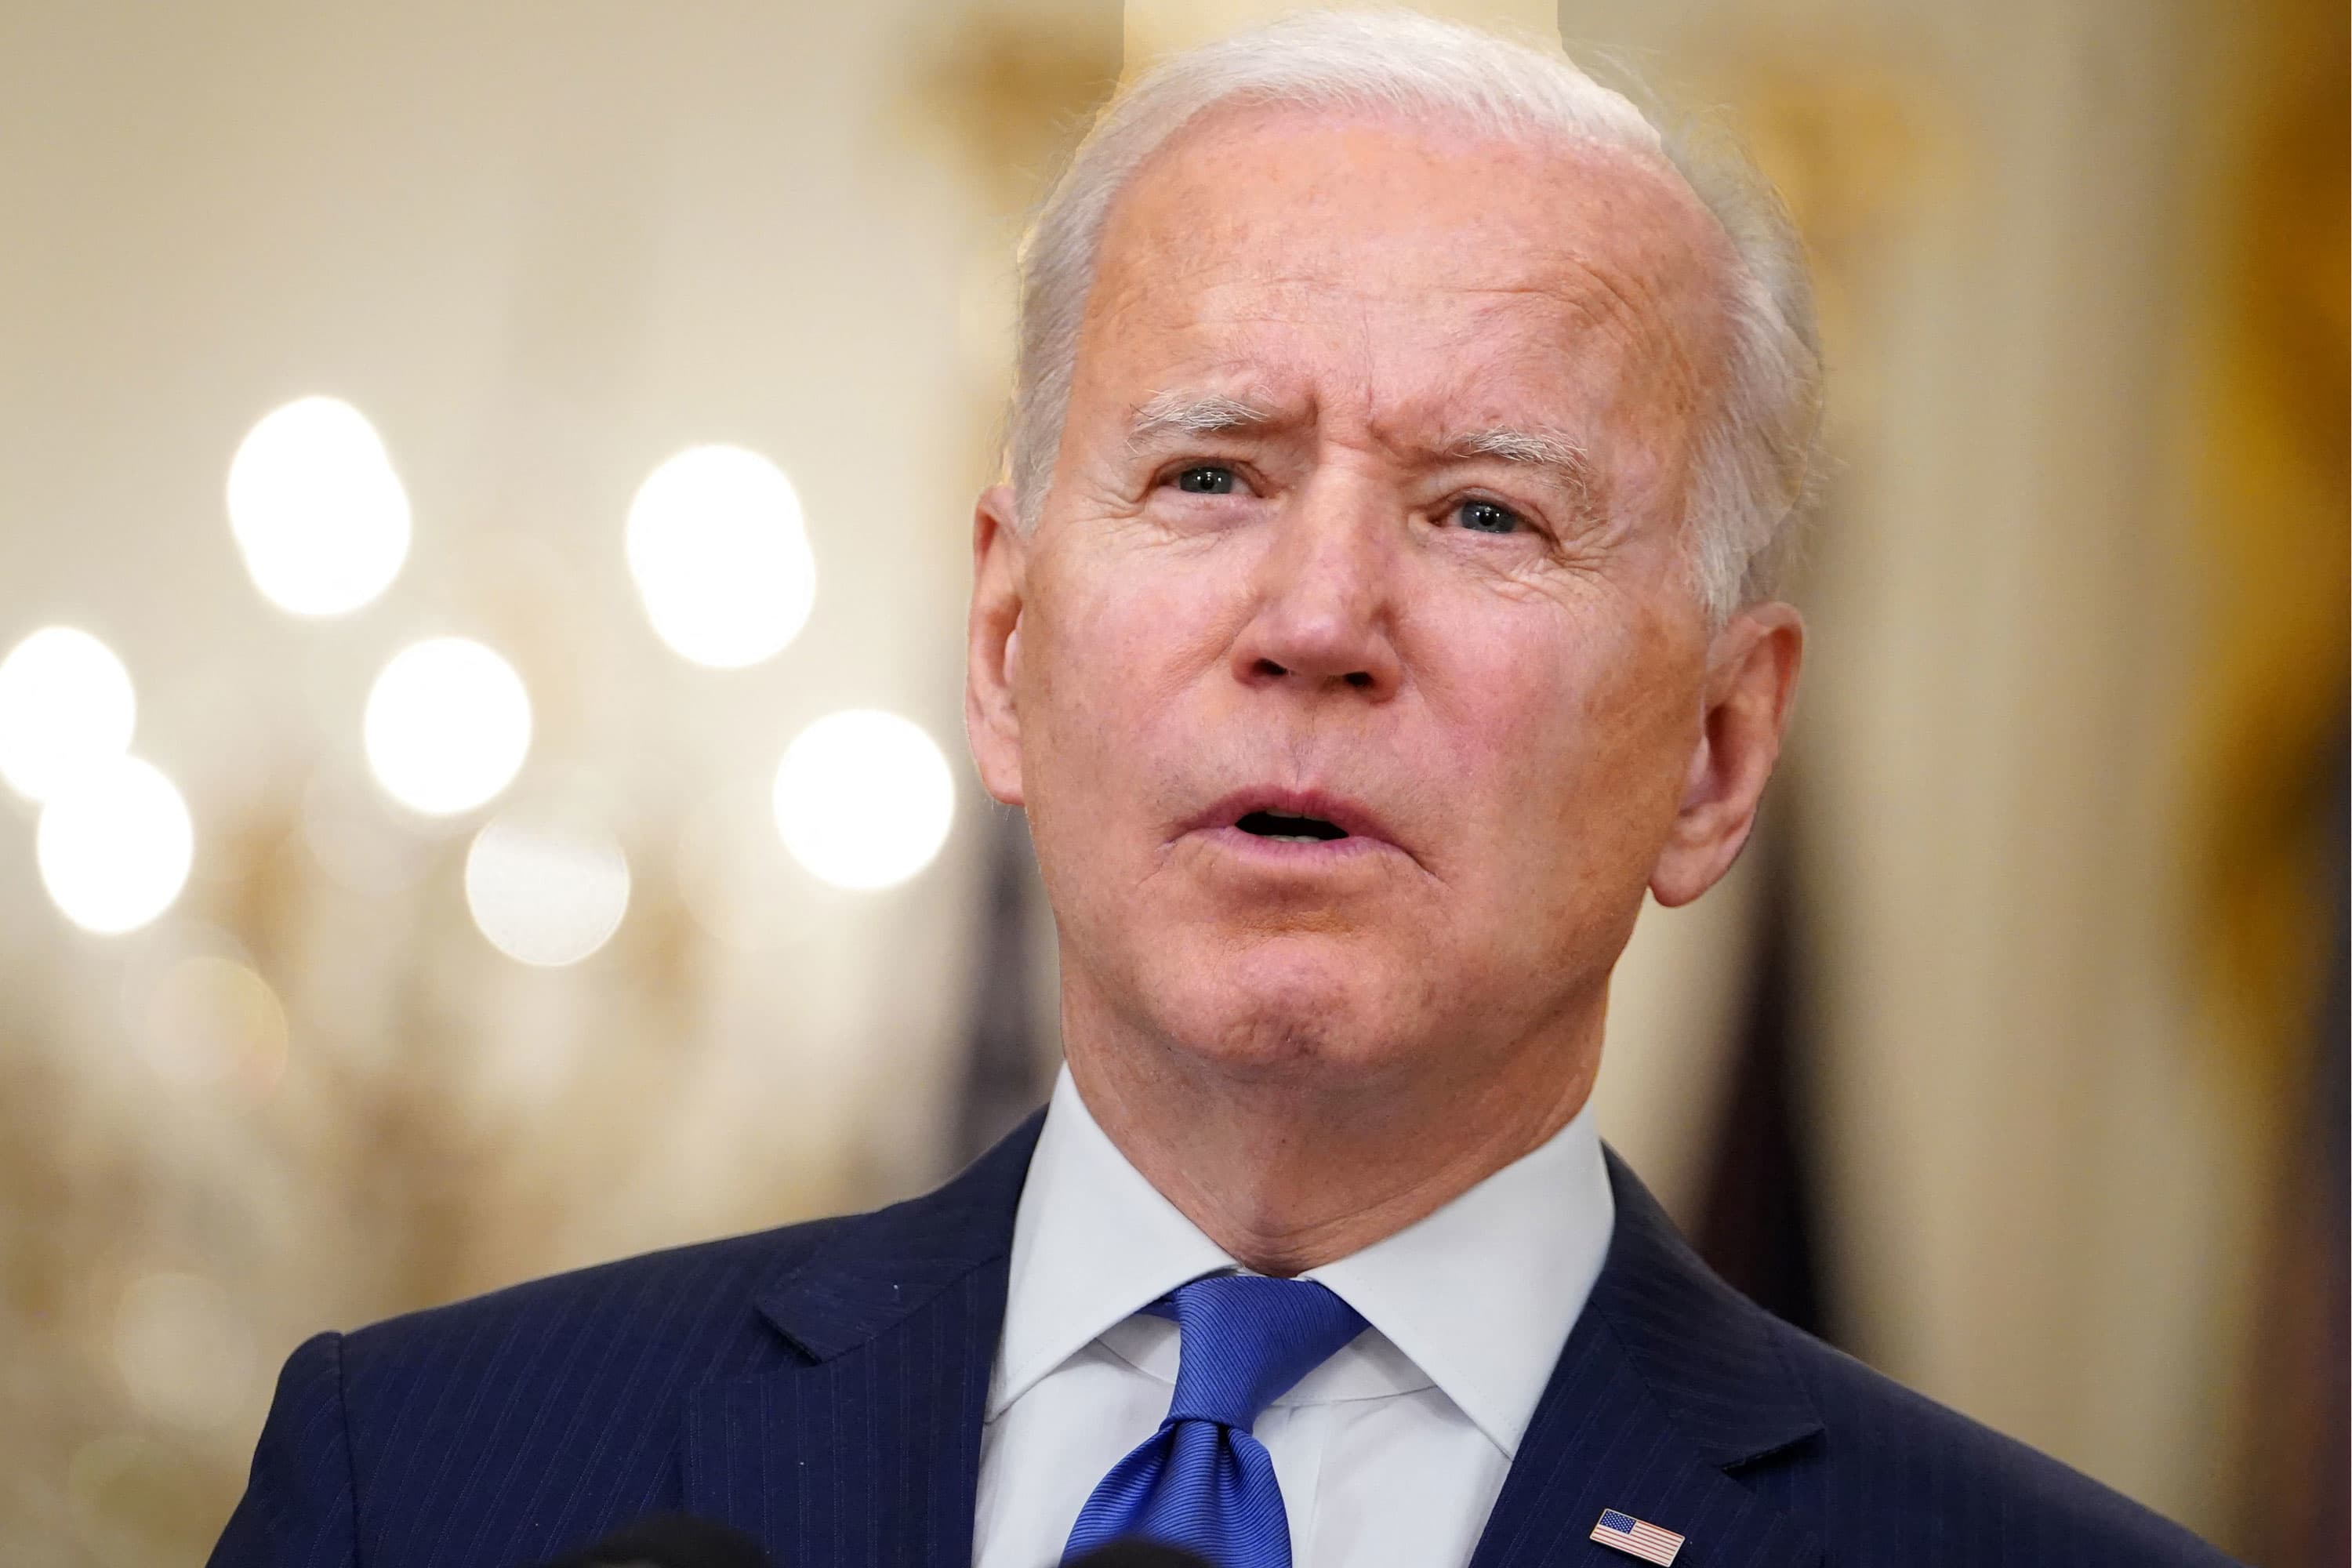 Biden charges management with Big Tech’s most prominent critics